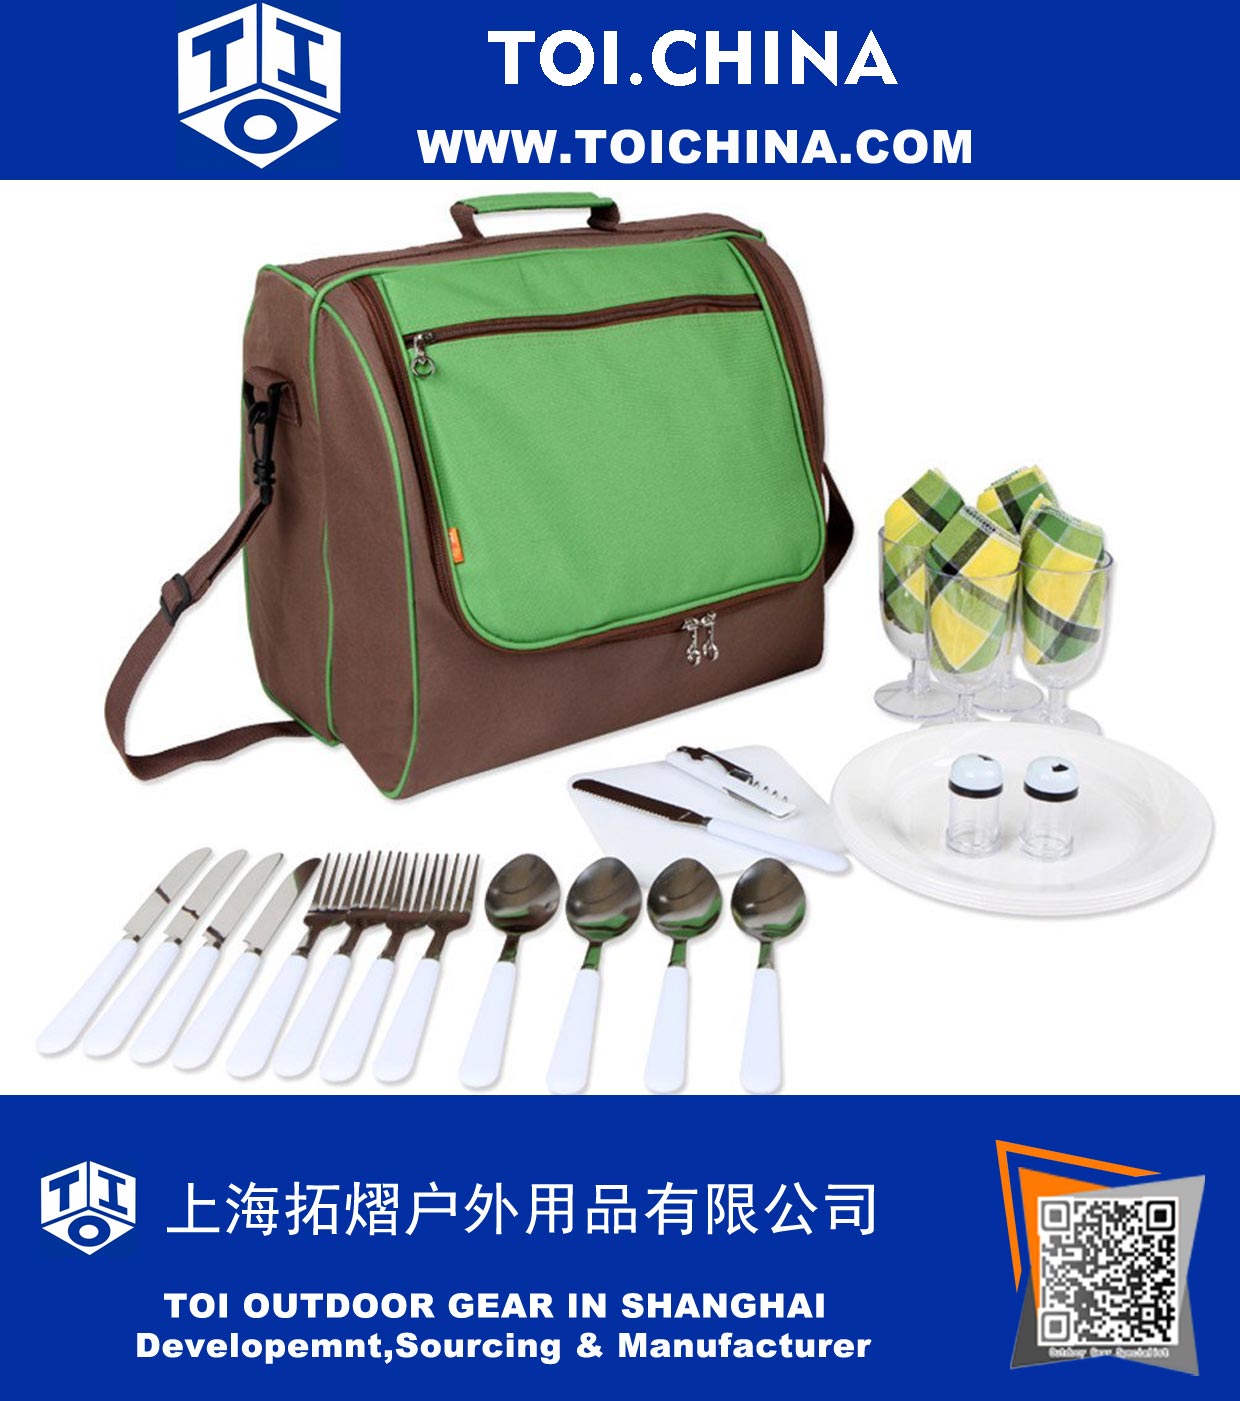 Picnic Bag - 4 Person Cutlery Set and Large Cooler Compartment - Perfect for concerts, beach, parks, hikes